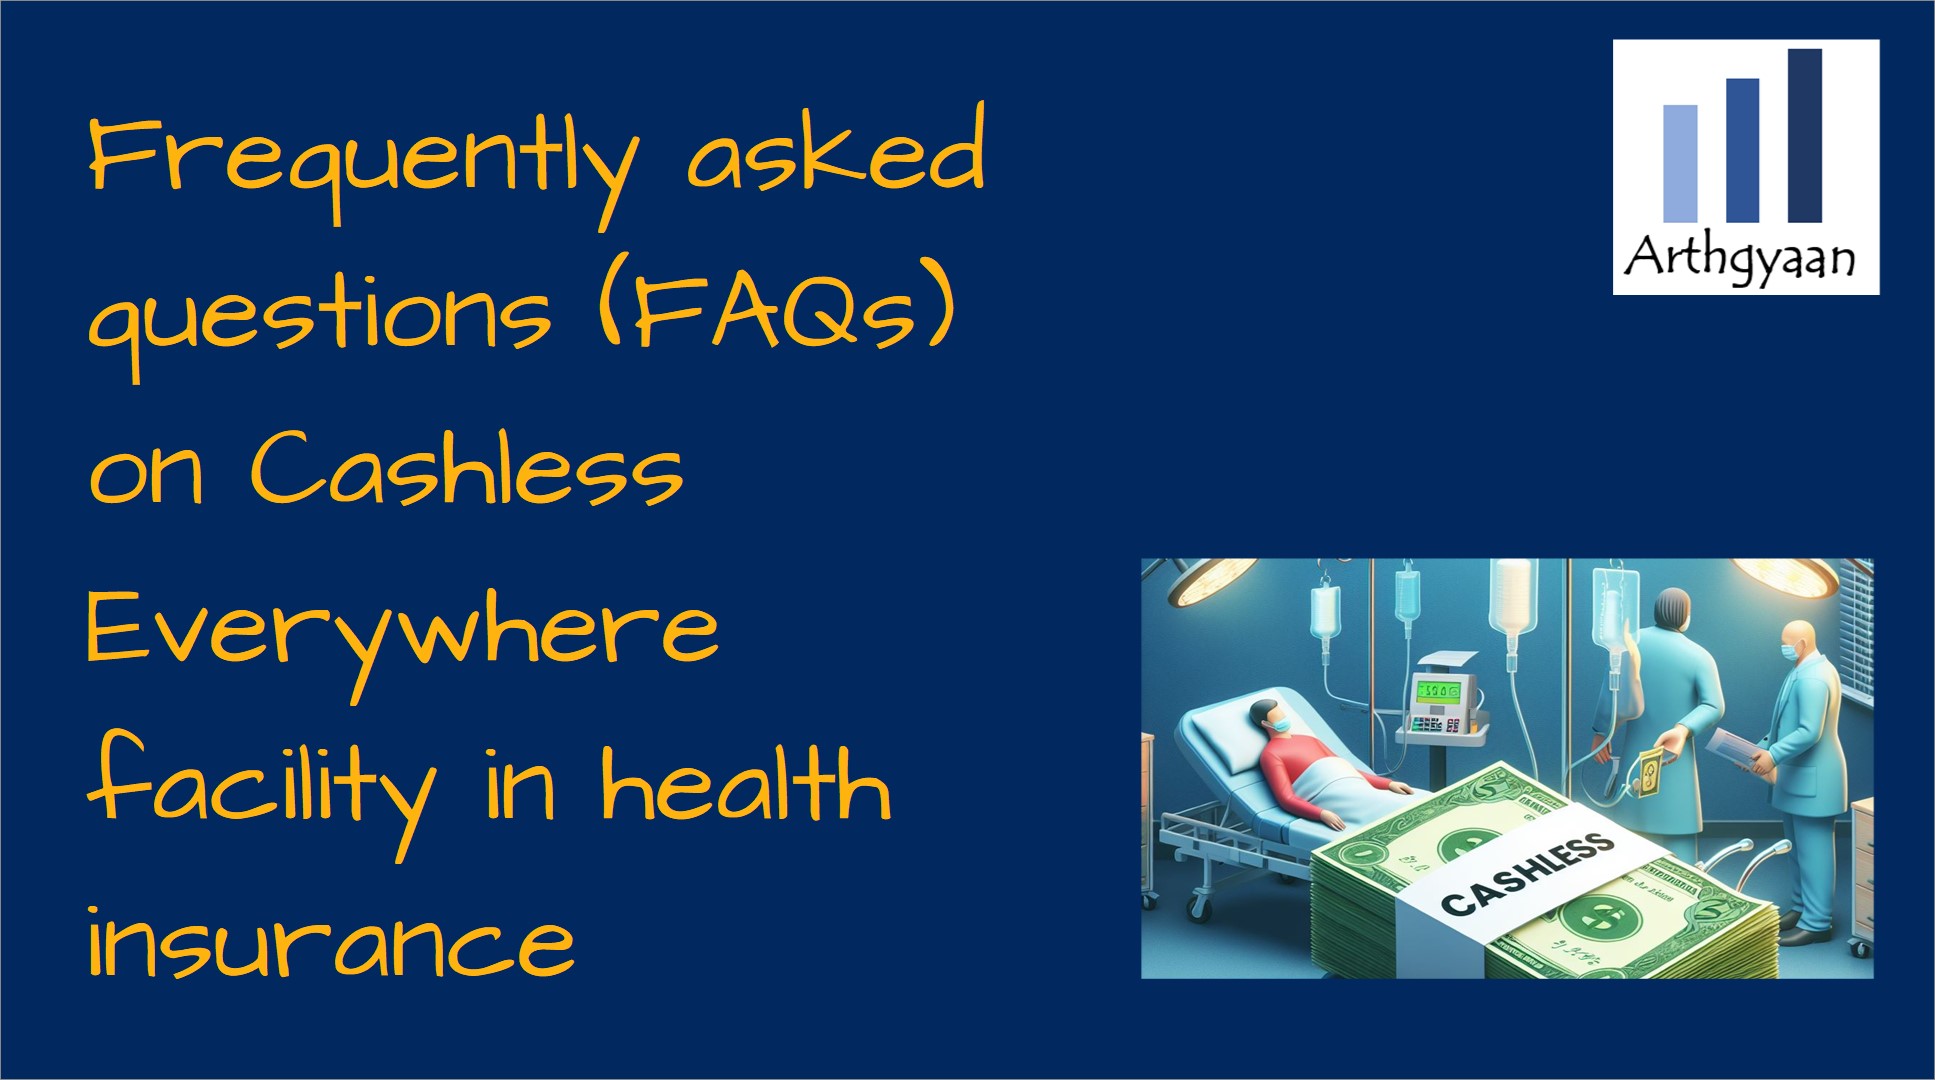 Frequently asked questions (FAQs) on Cashless Everywhere facility in health insurance